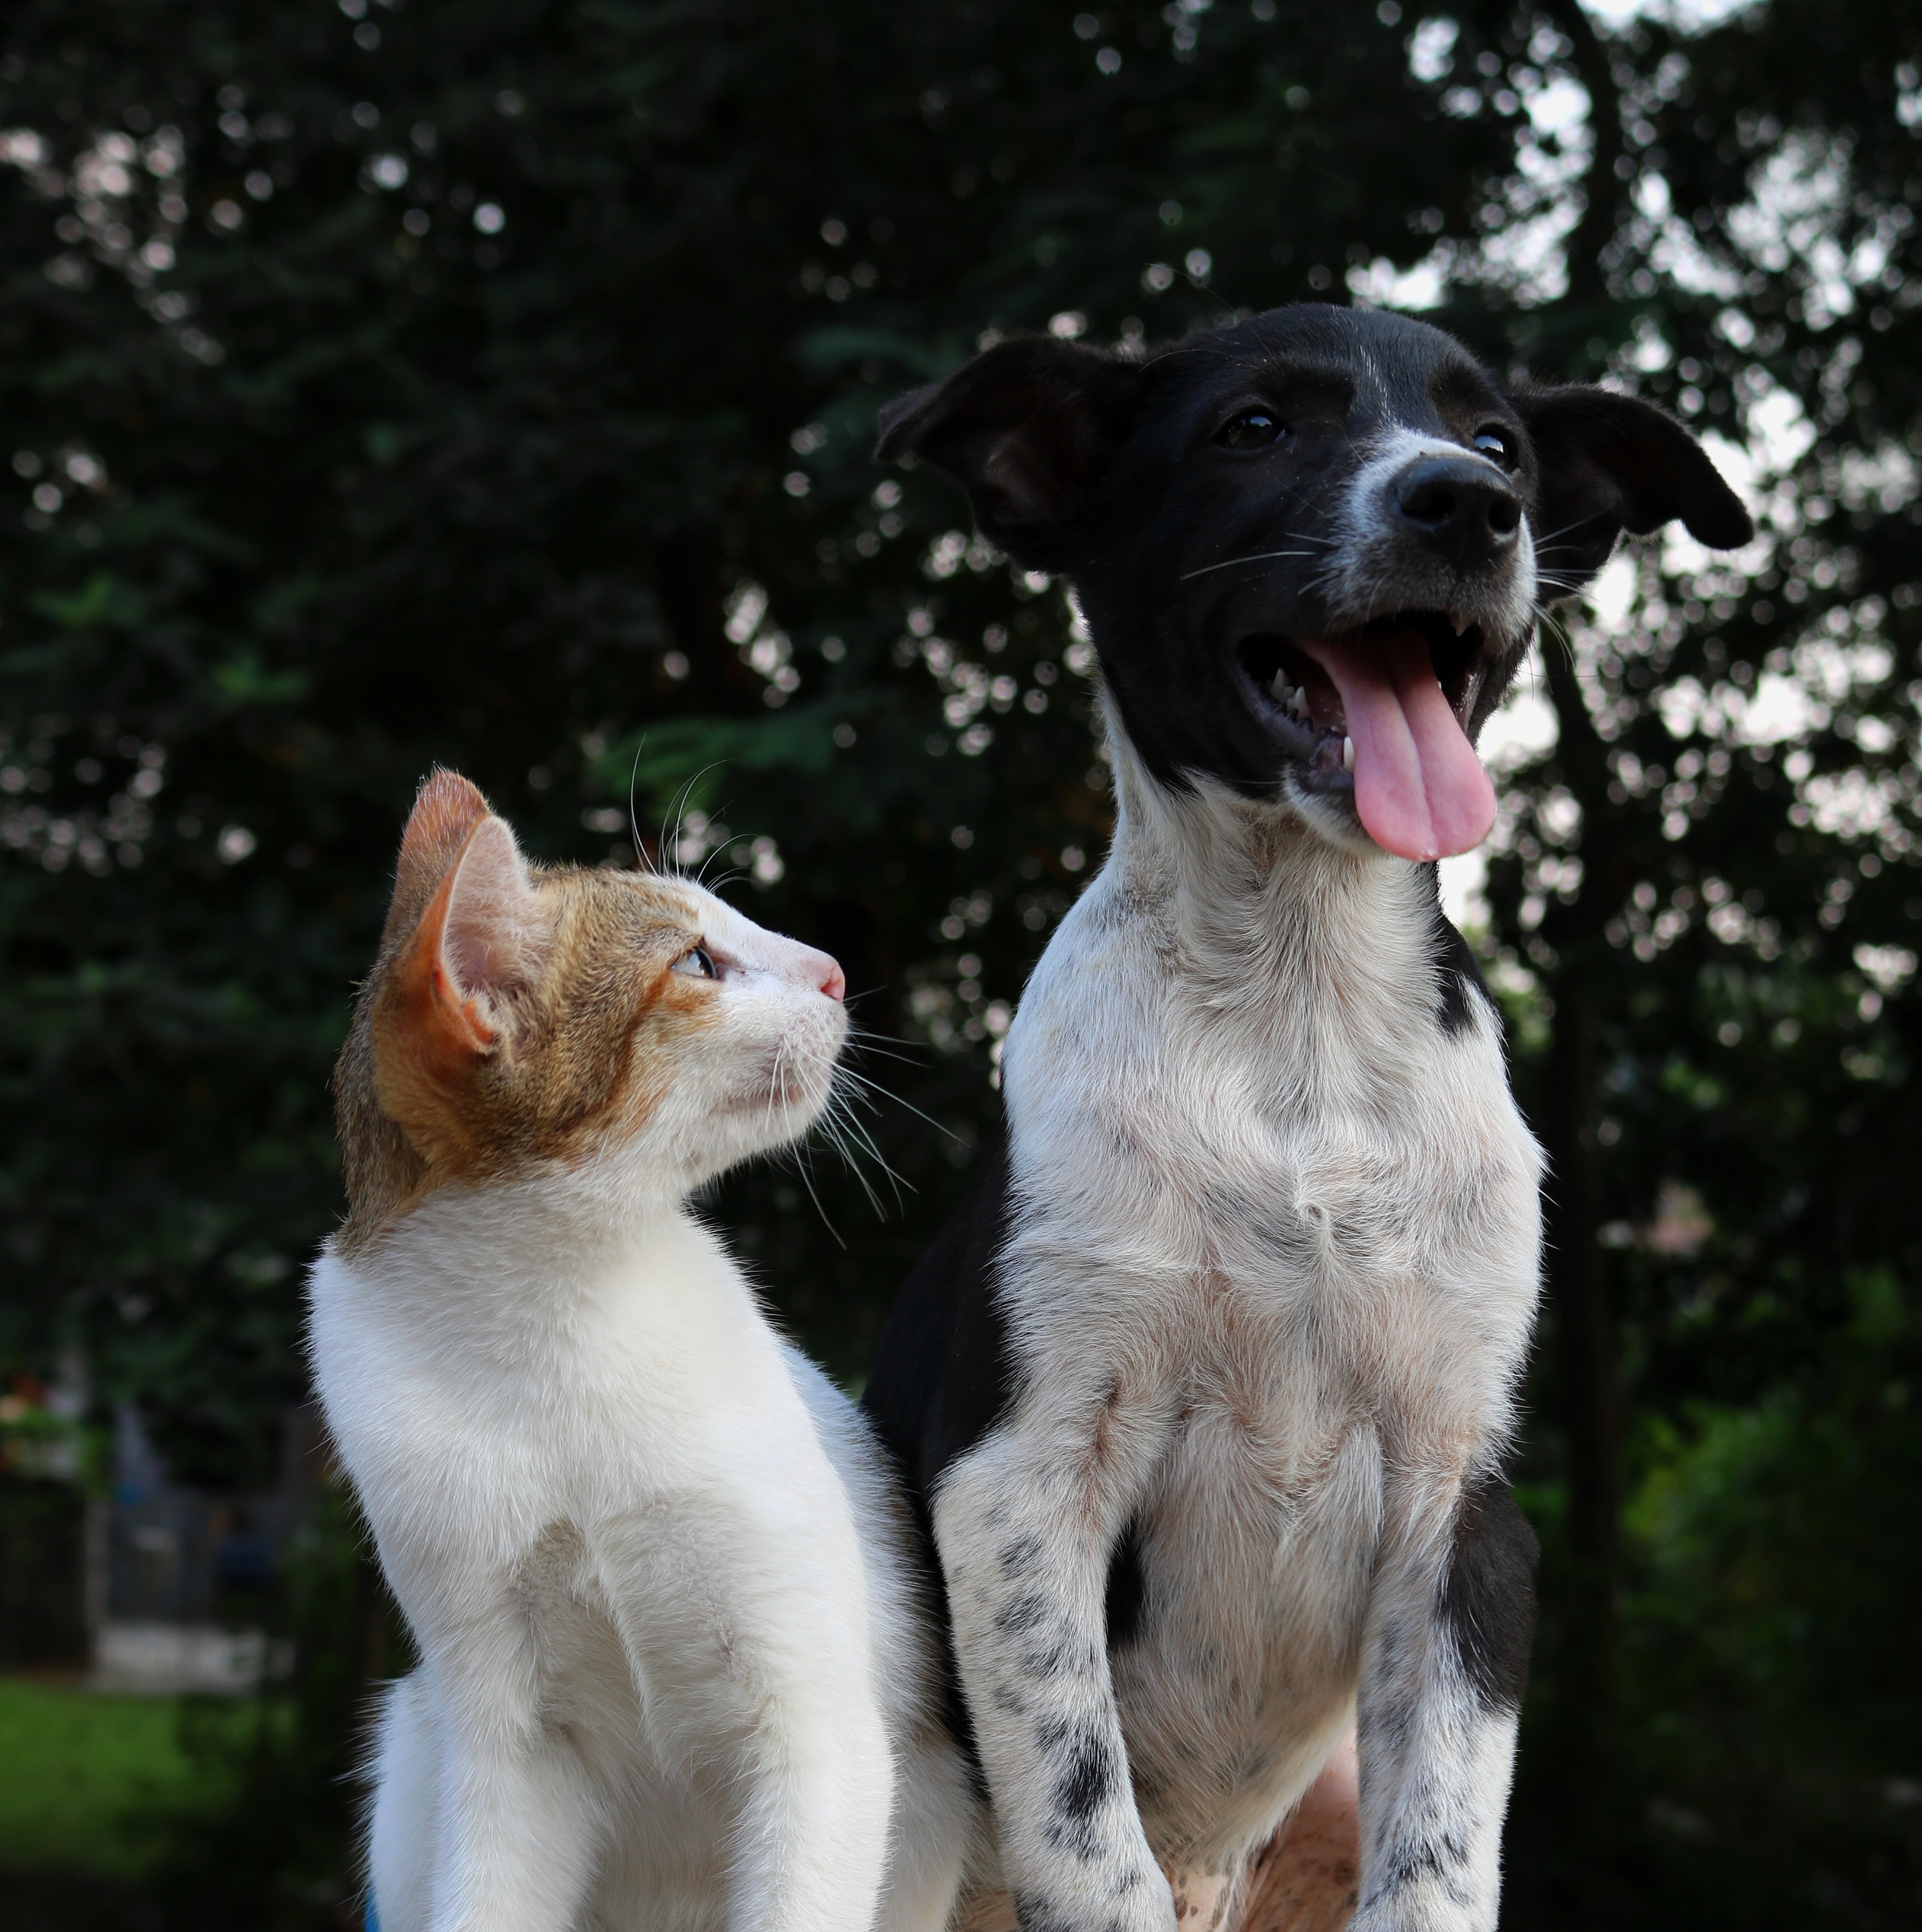 A young kitten looks at a younger, larger dog curiously. Photo by Anusha Barwa via Unsplash